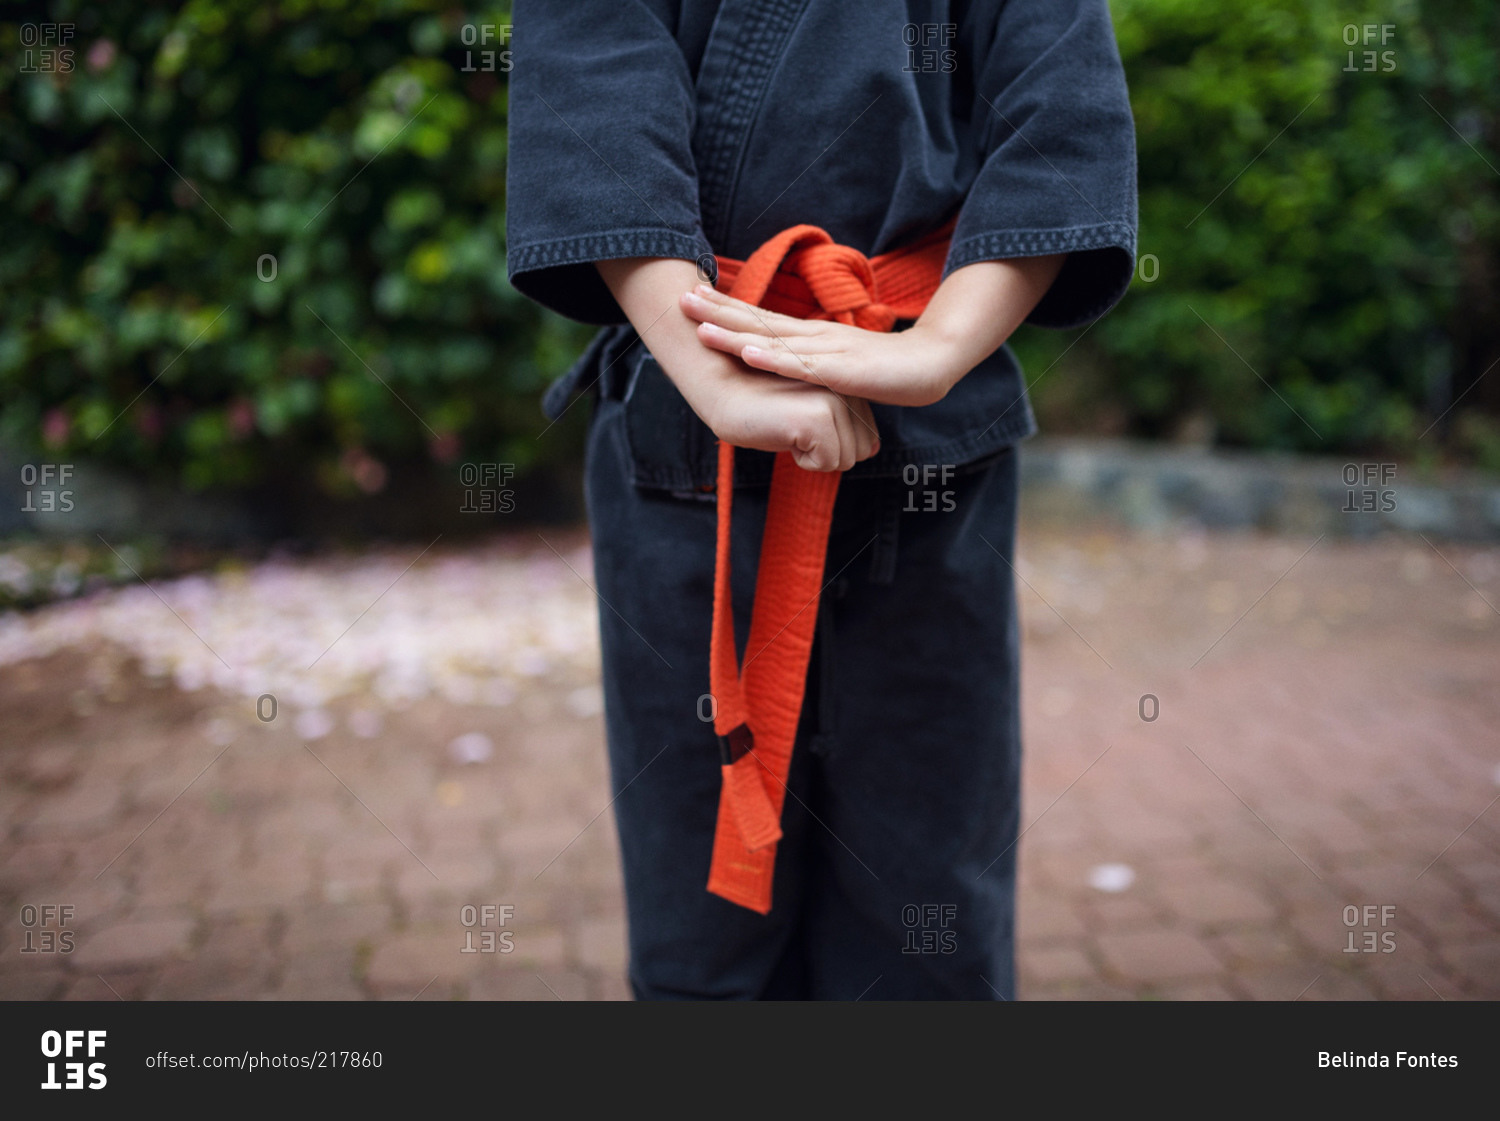 A girl in a karate uniform covers her fist with her palm